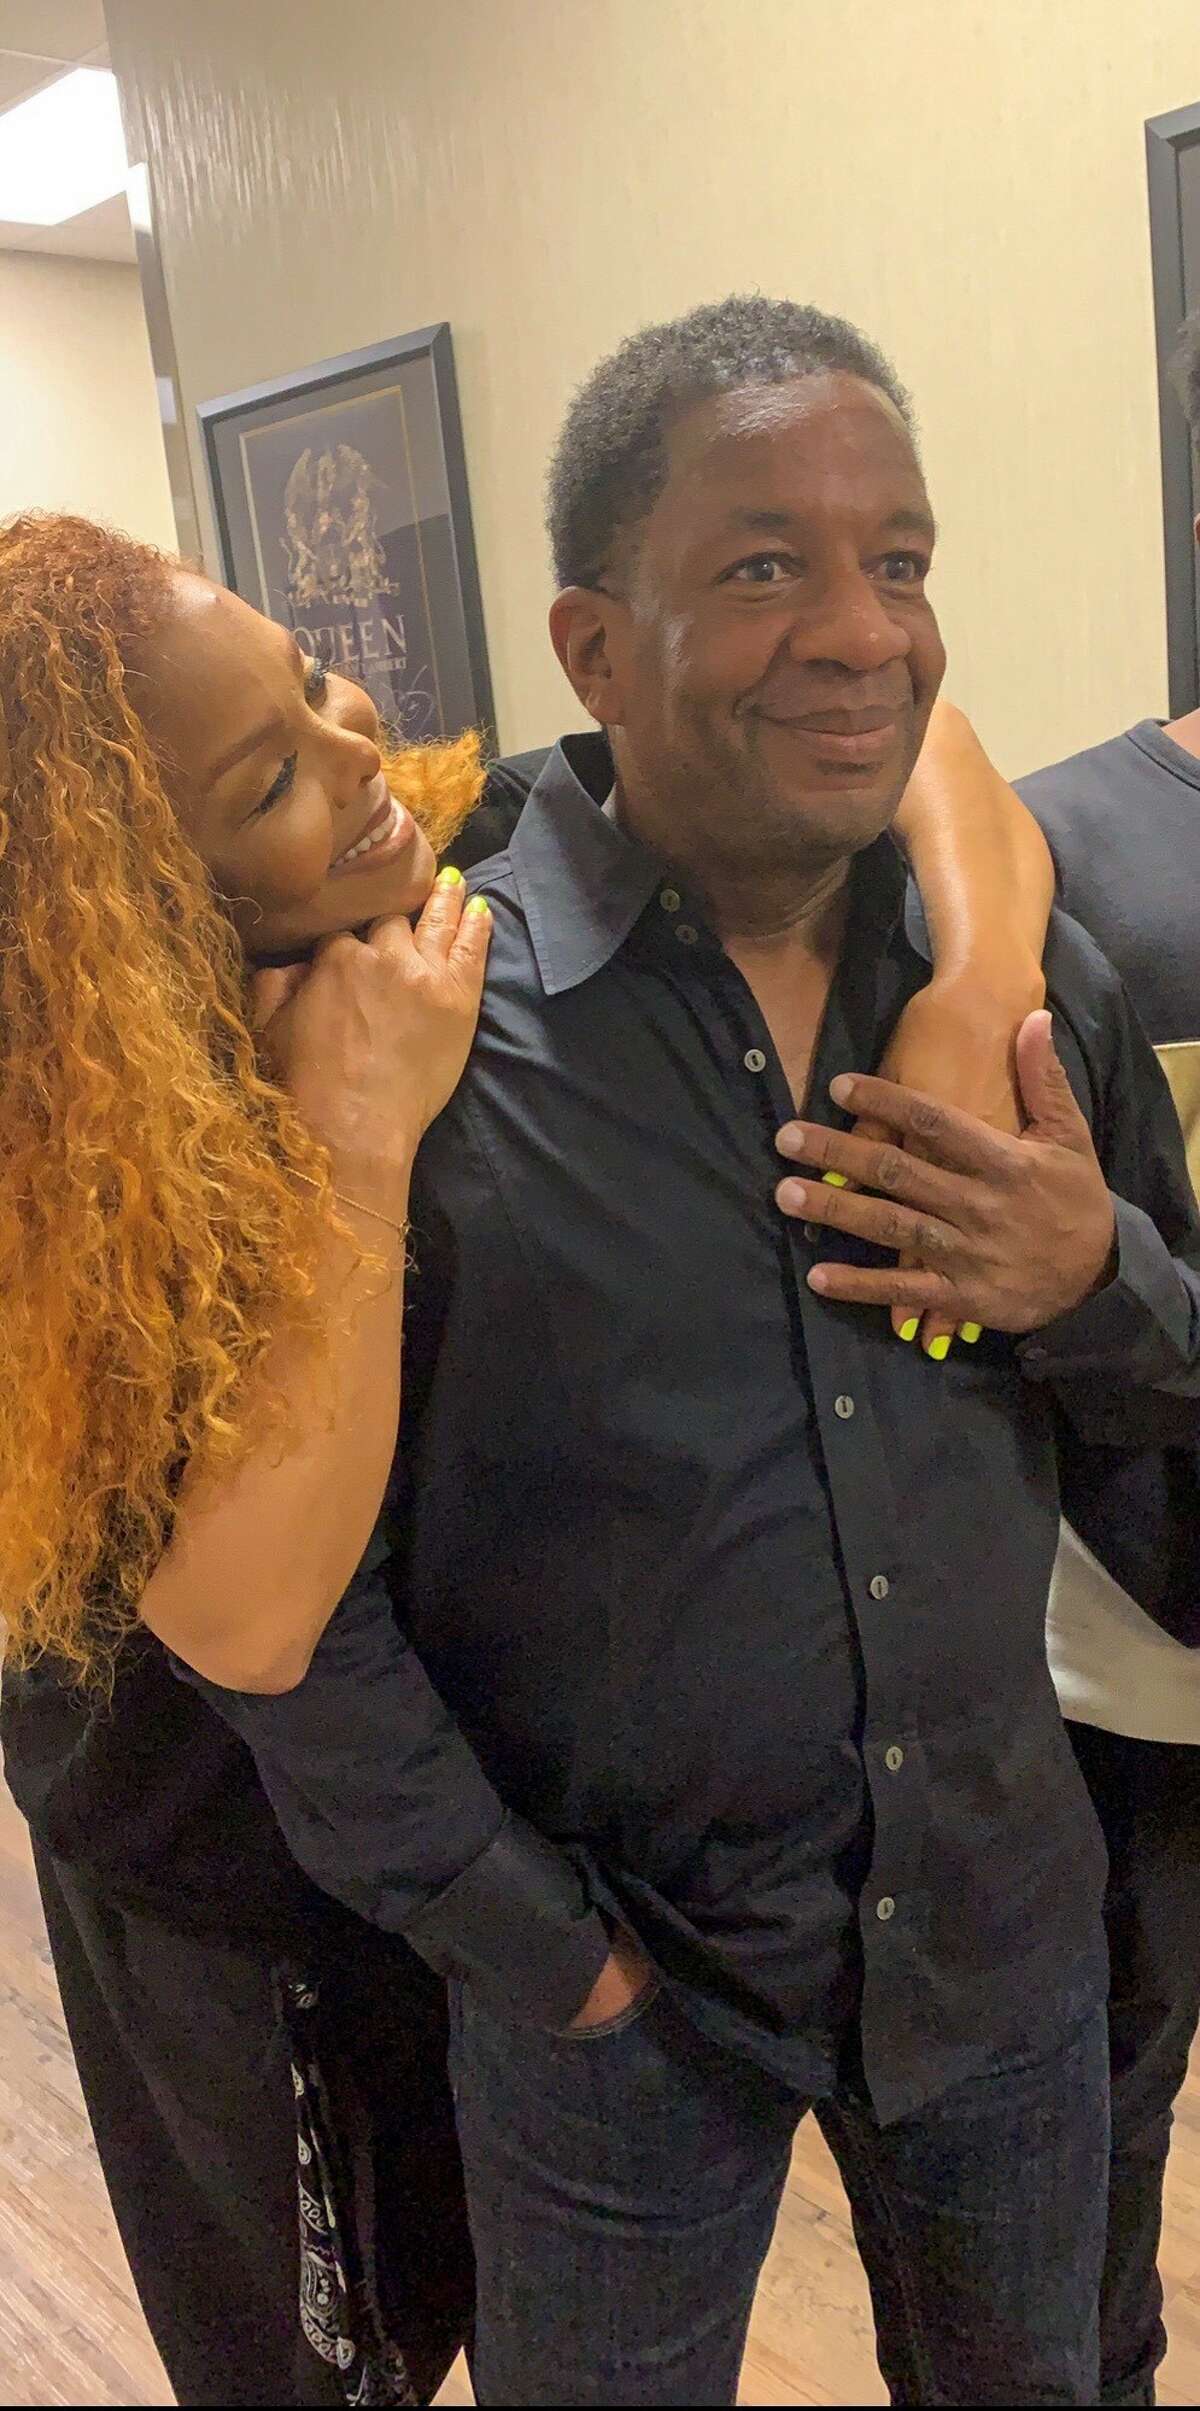 A Houston man got the surprise of his life when he met Janet Jackson in Vegas